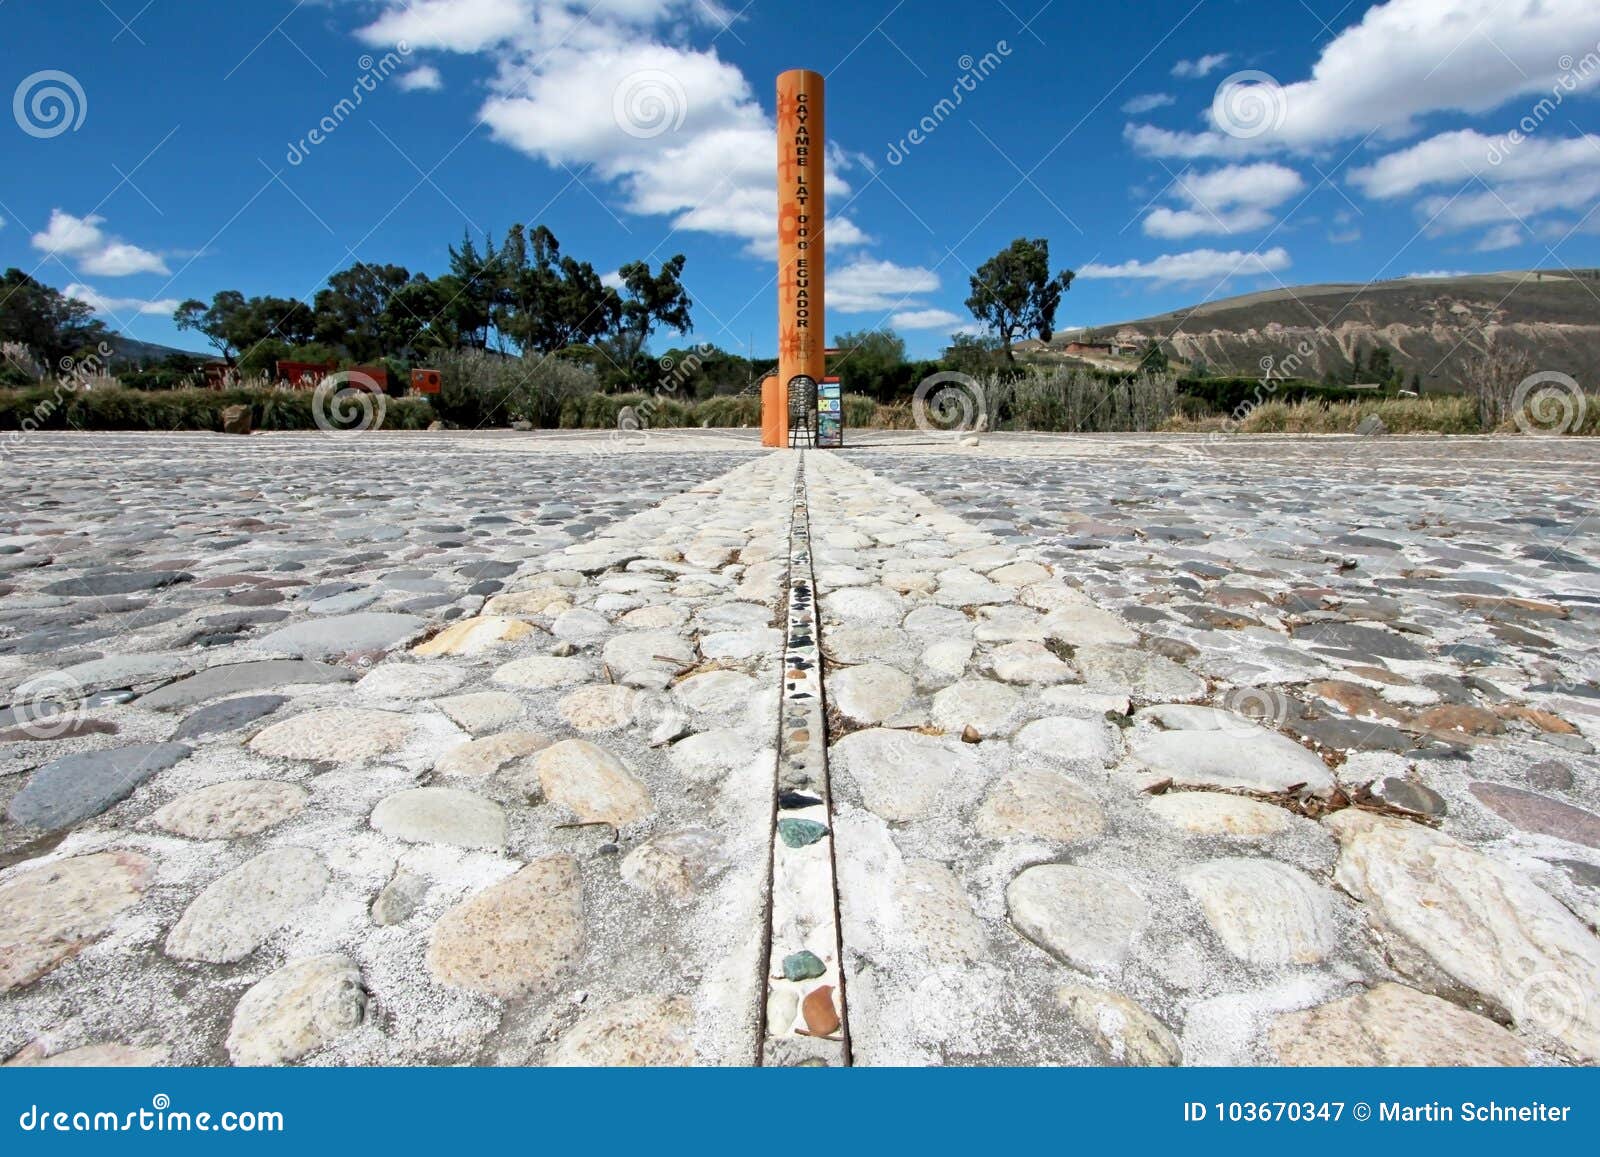 equator line monument, marks the point through which the equator passes, cayambe, ecuador